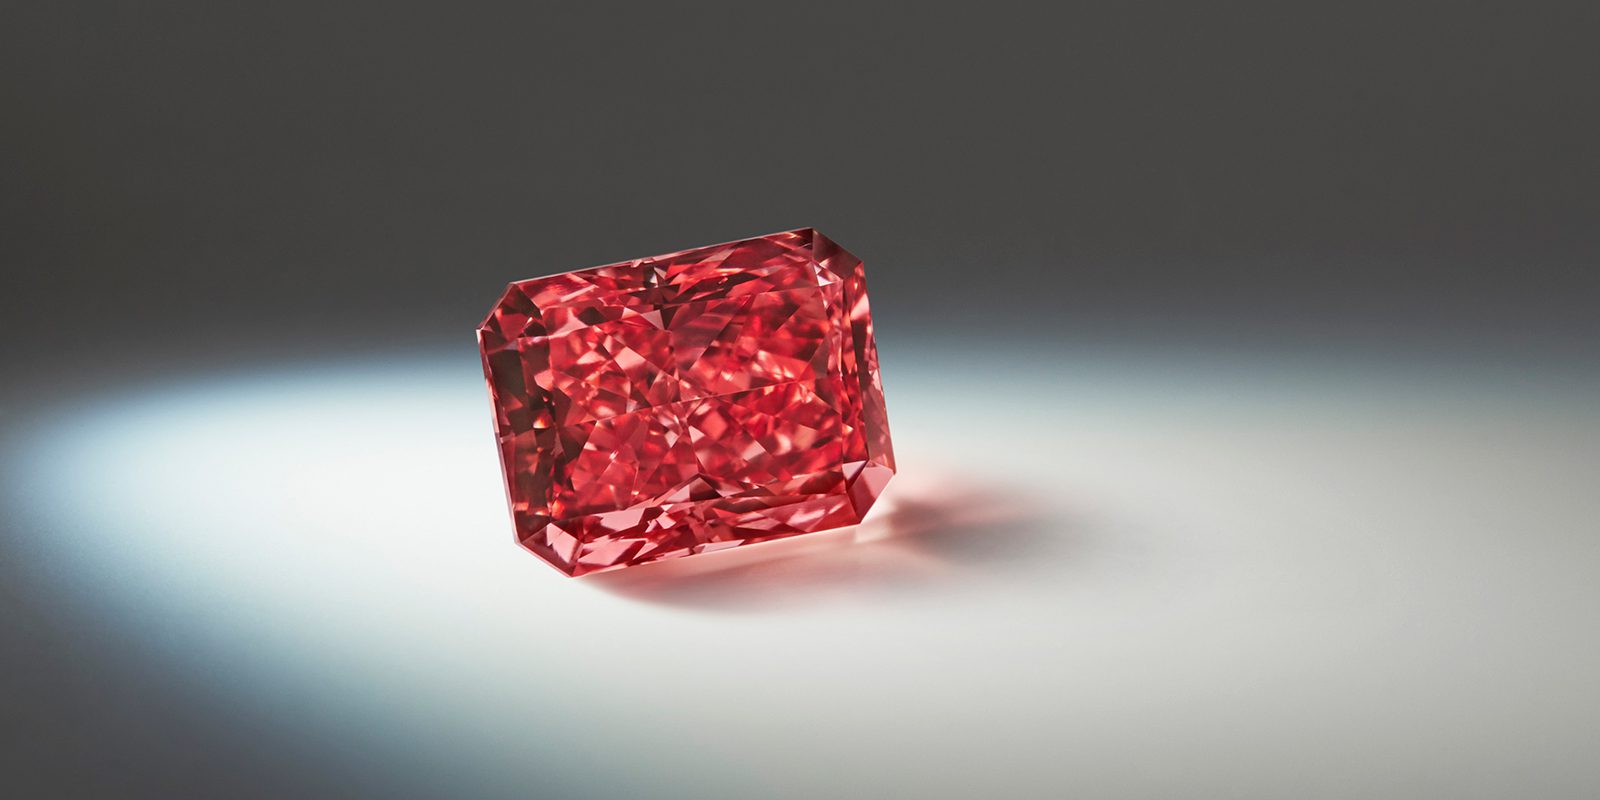 Argyle Everglow 2.11 carat radiant shaped Fancy Red. Image by Rio Tinto